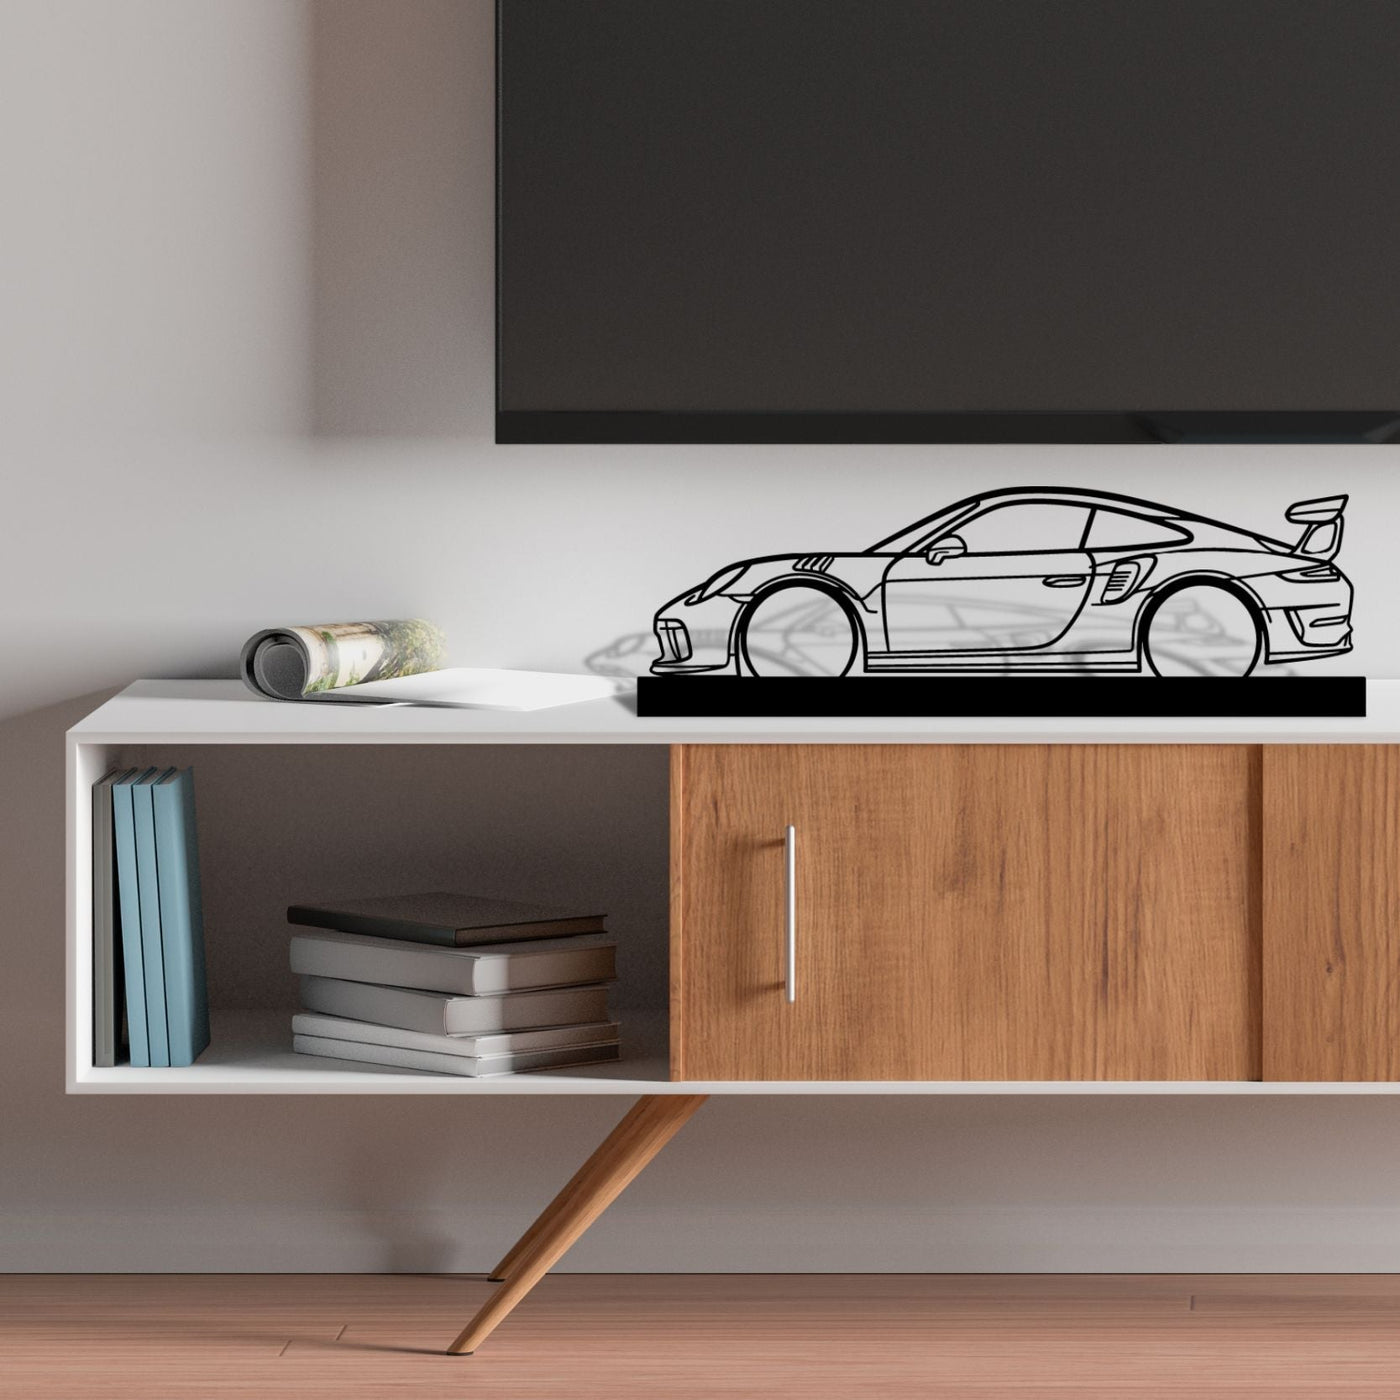 911 GT3 RS model 991 Silhouette Metal Art Stand